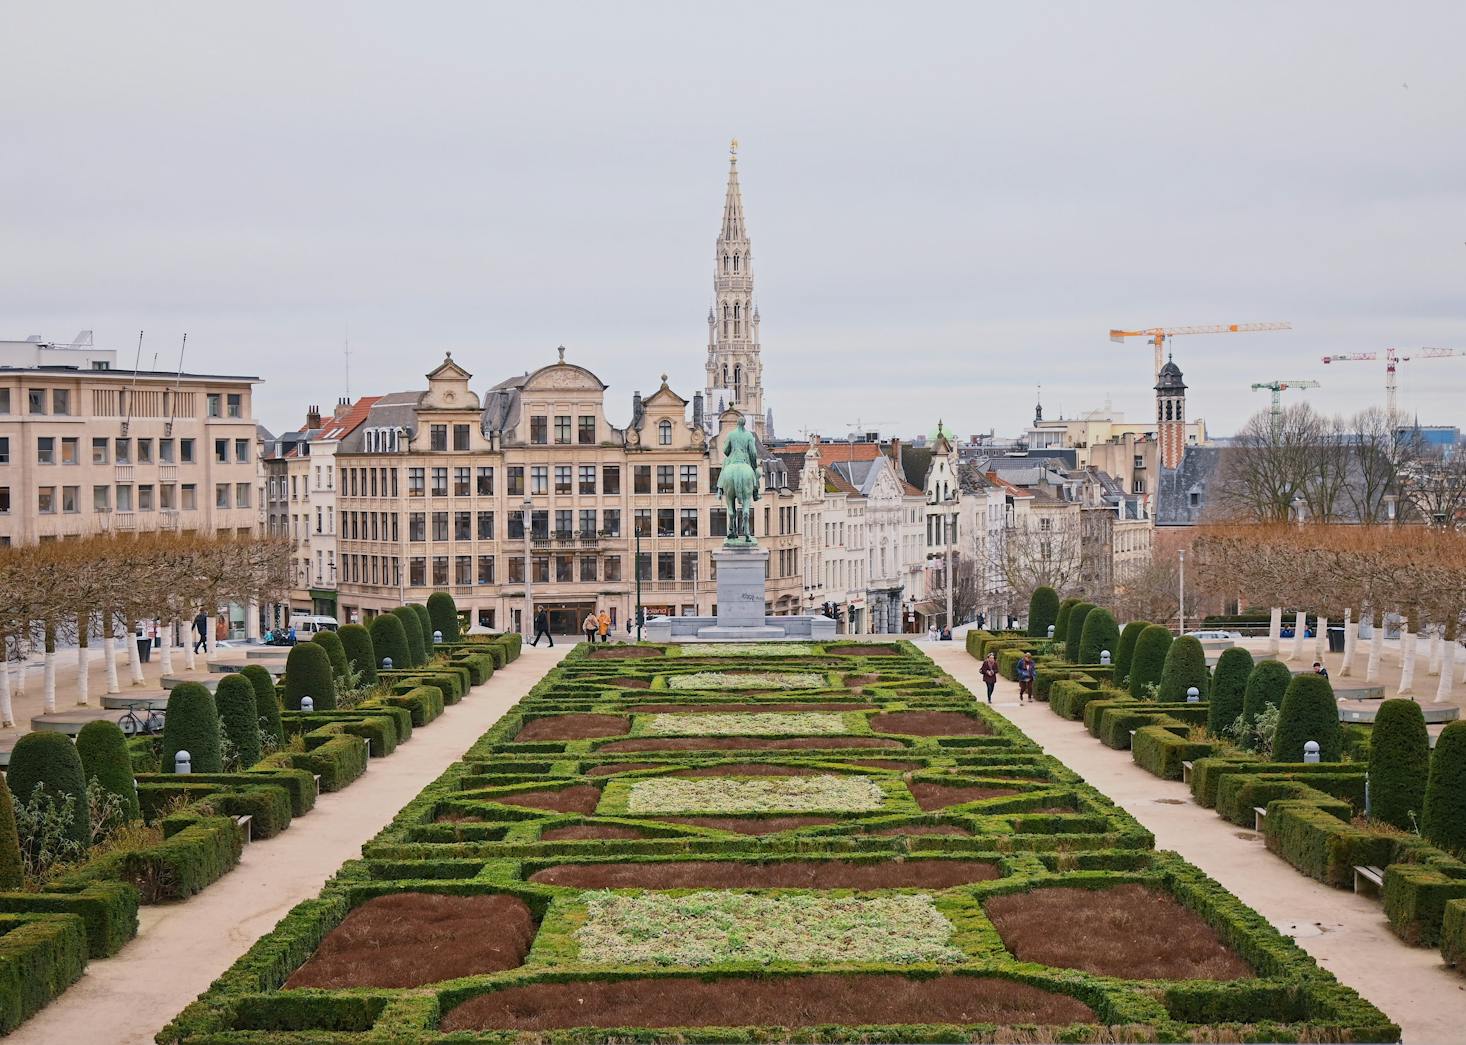 Brussels on a budget